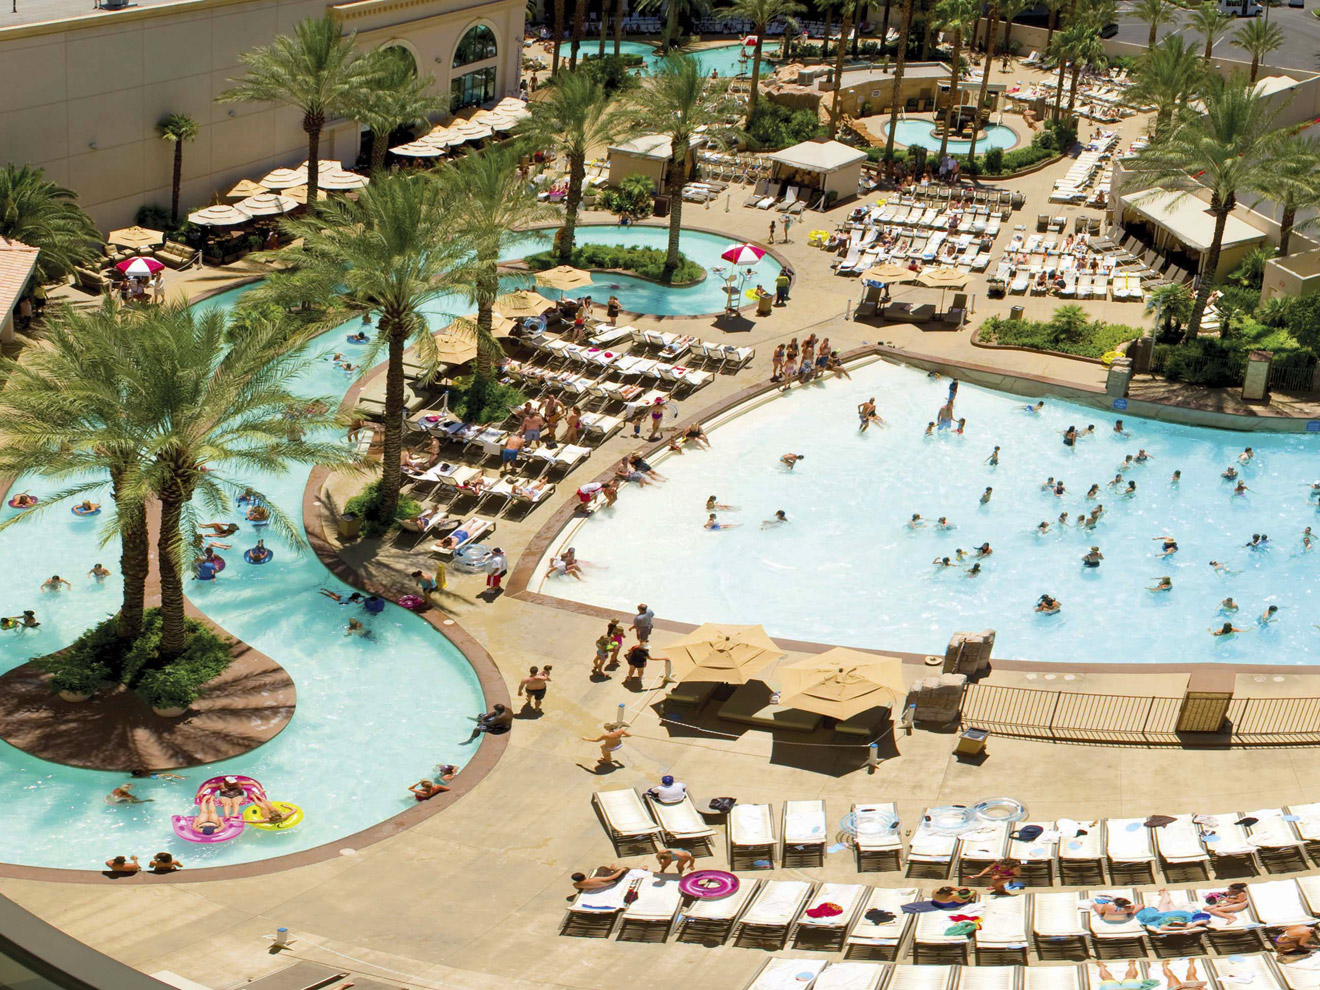 For Family Fun, Here Are The 5 Best Pools In Vegas For Kids - LA